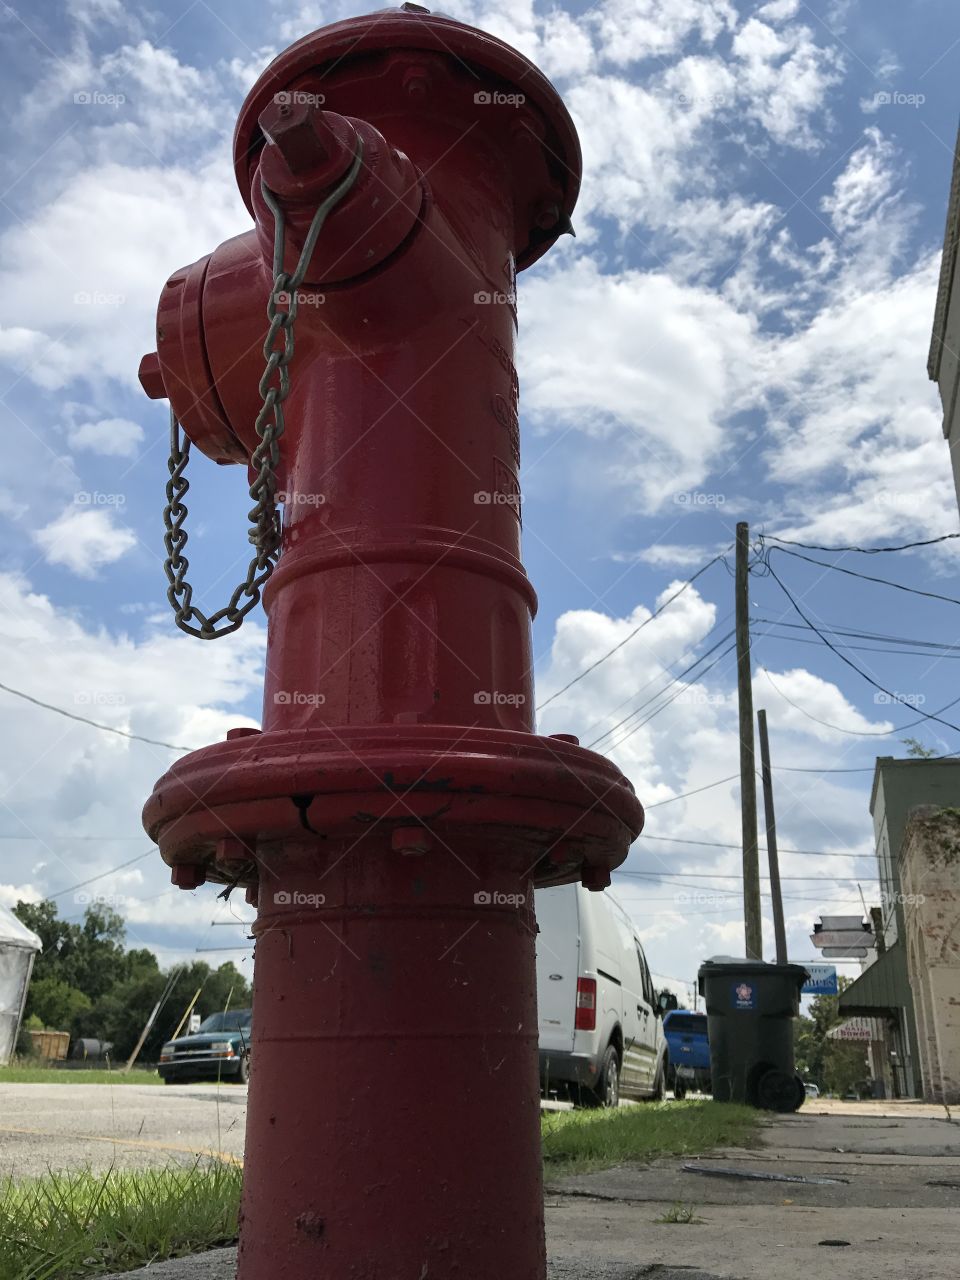 Fire Hydrant.